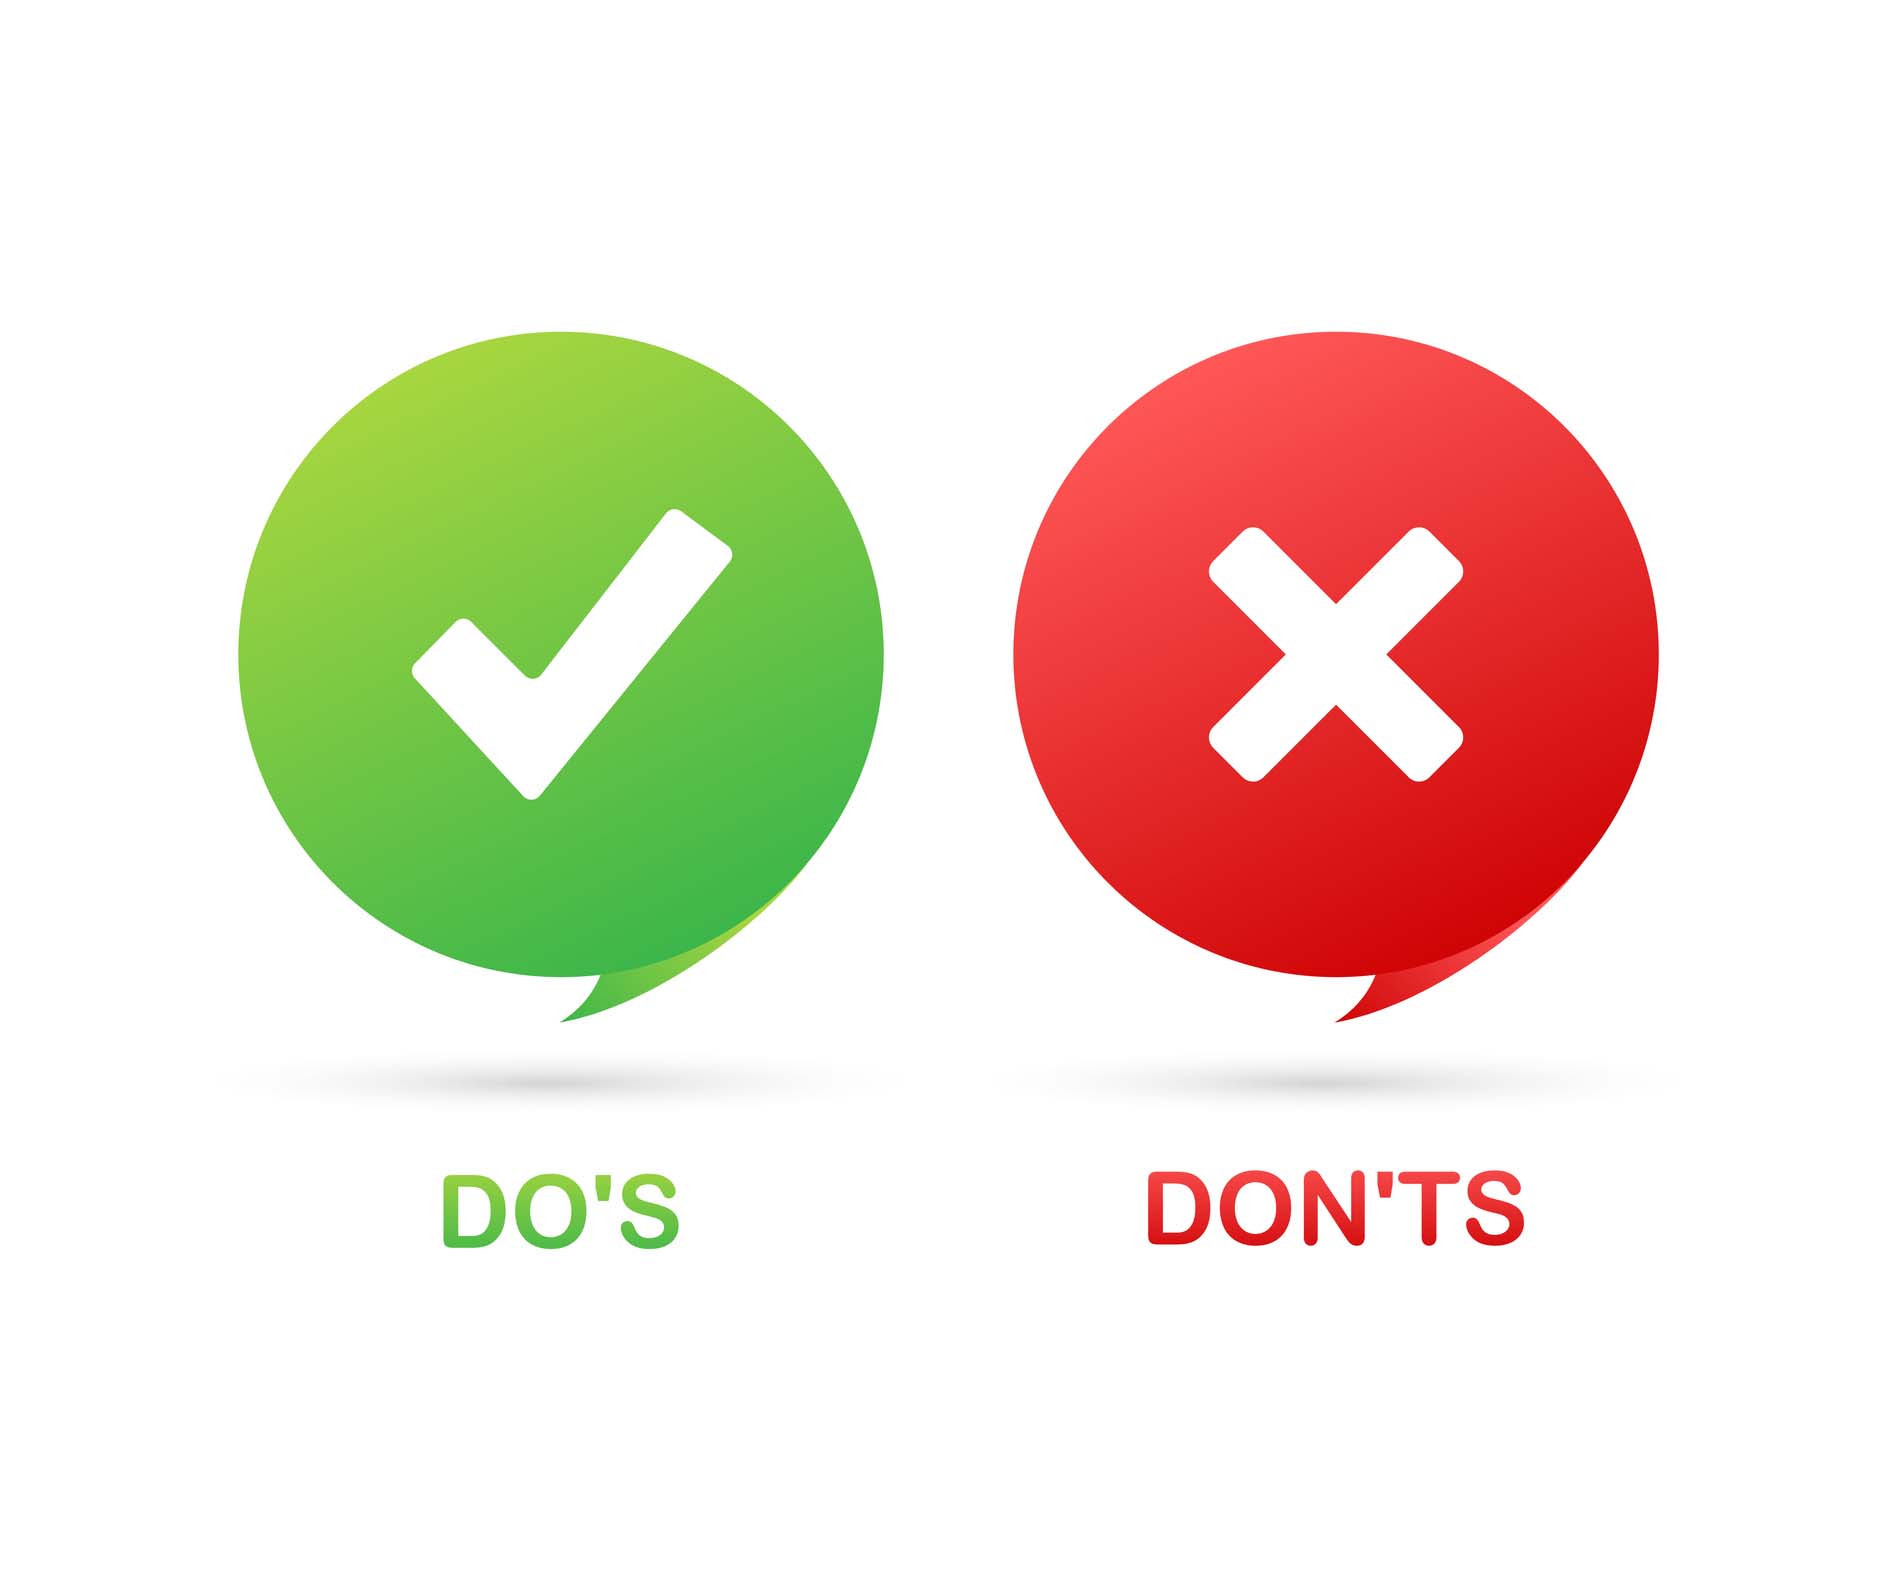 graphic of green bubble with a check for do's and a red bubble with an x for don'ts